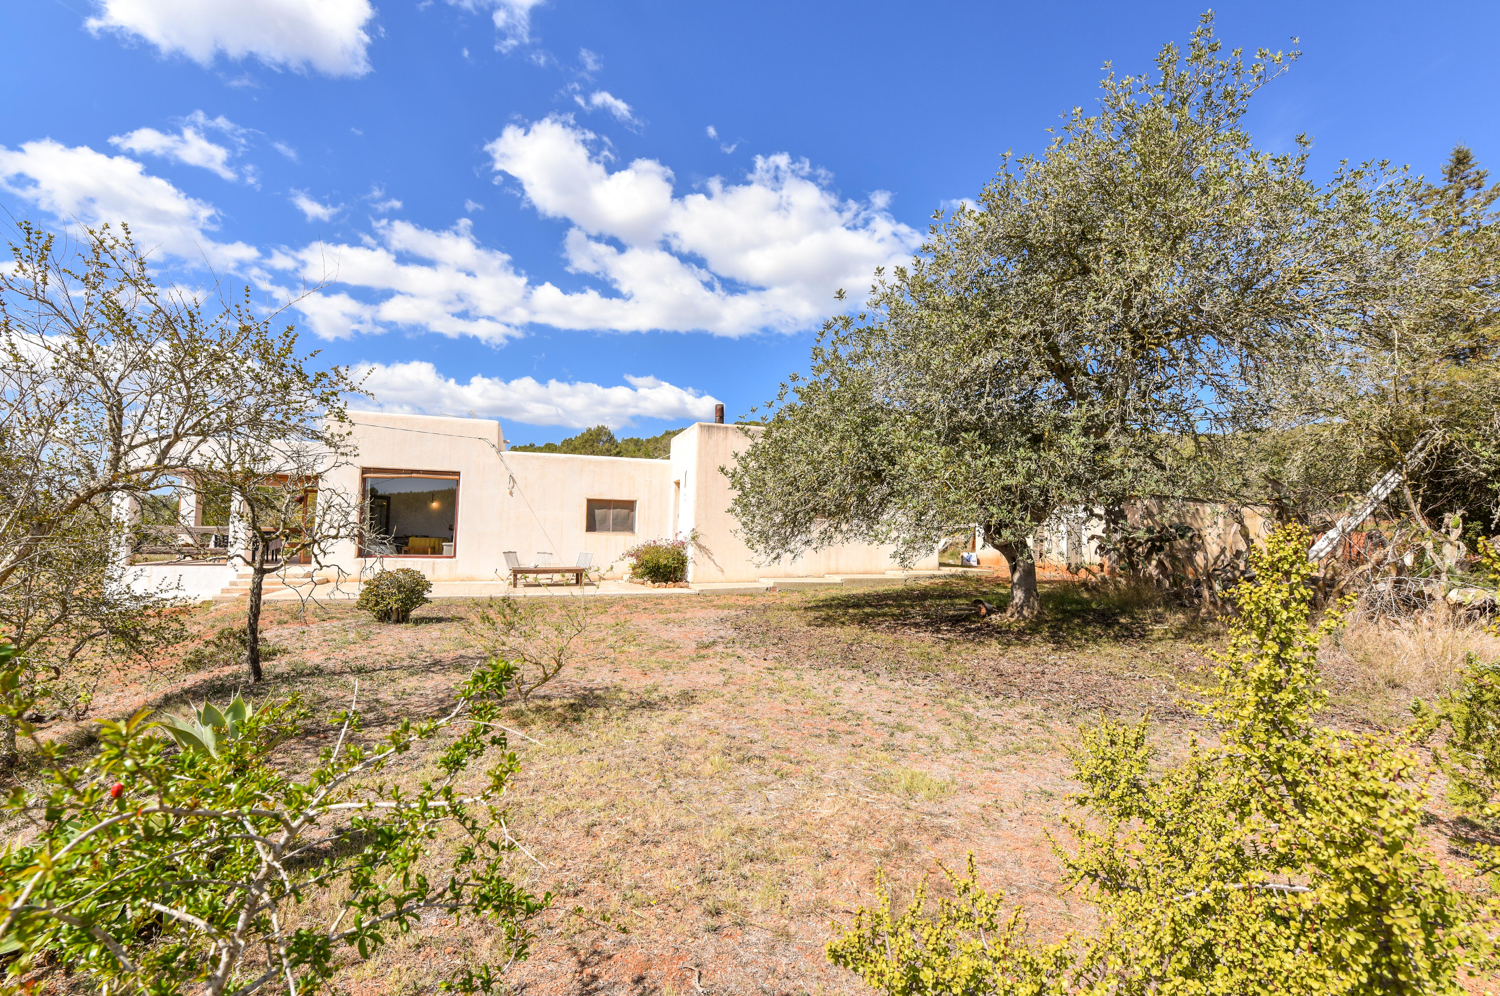 Traditional Spacious Finca Close to Santa Gertrudis Ideal for Renovation, ref. 1683, for sale in Ibiza by everything ibiza Properties